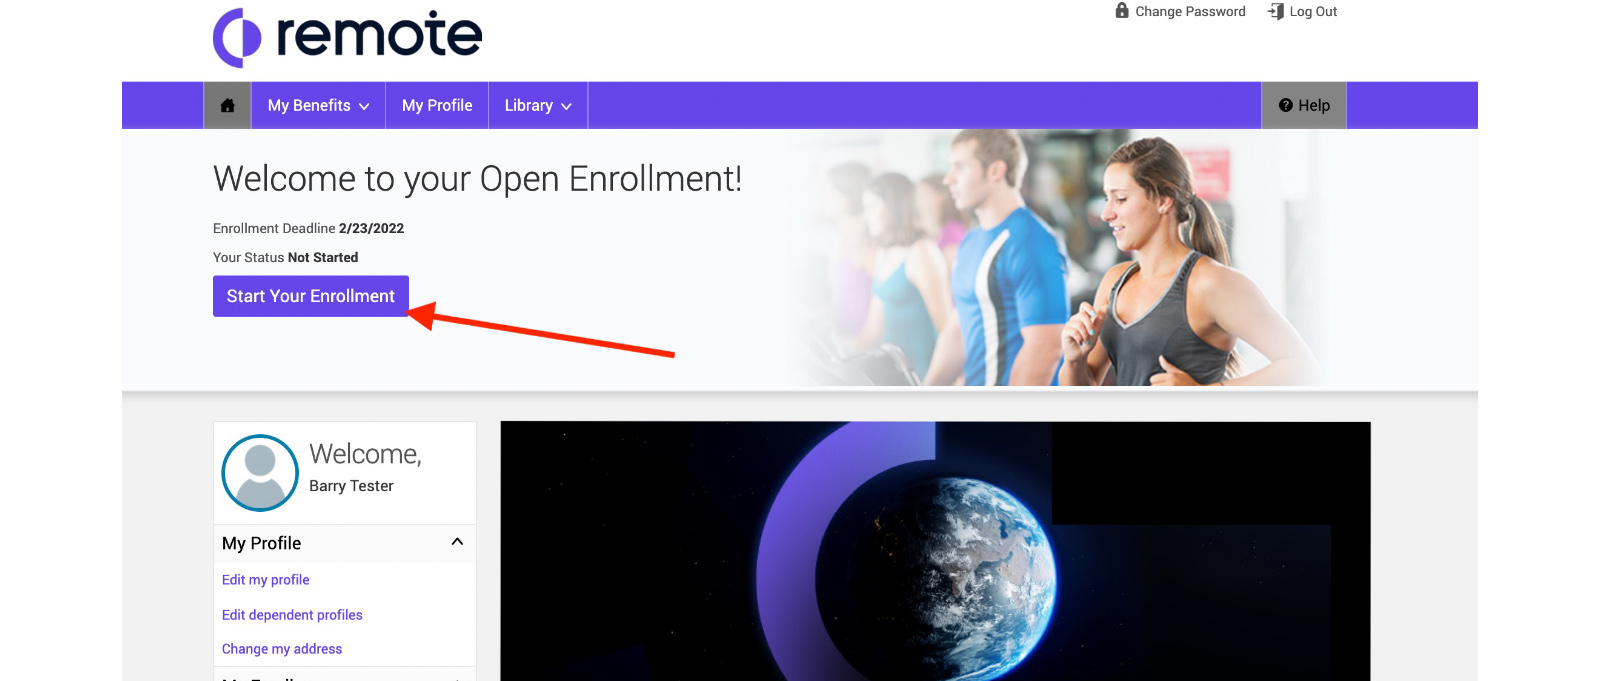 Start Your Enrollment button from Remote homepage.